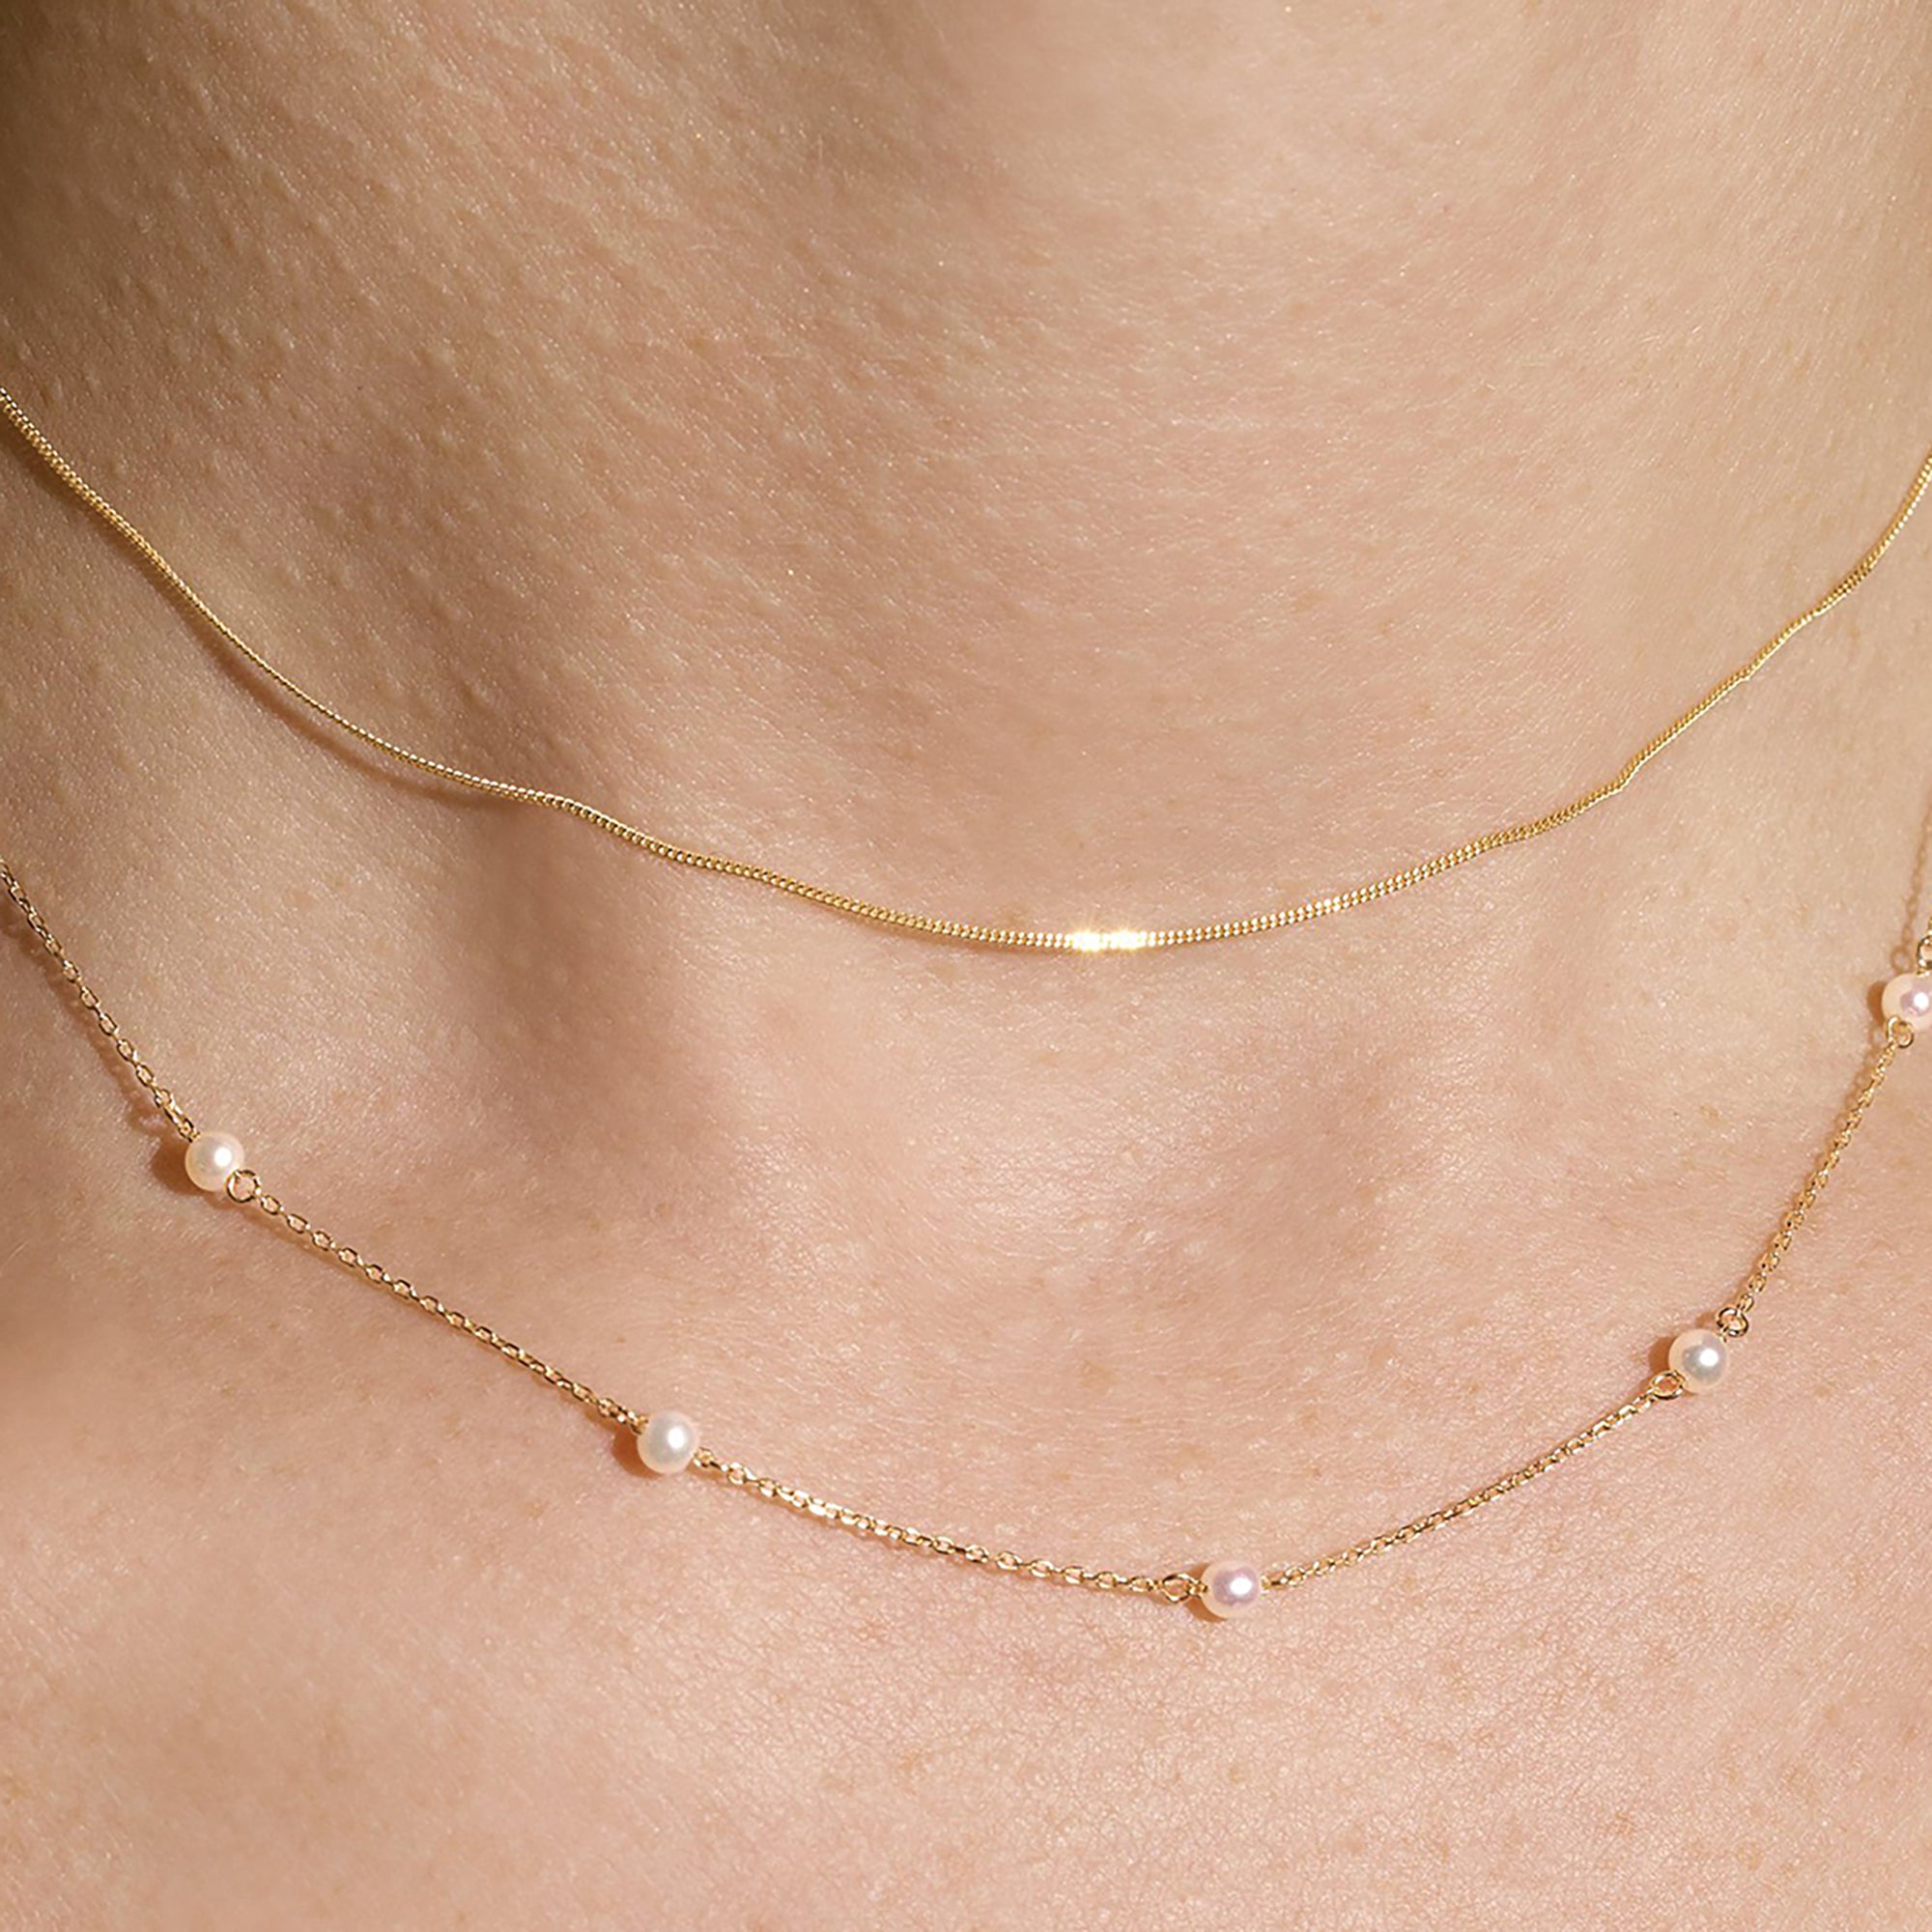 Necklaces - Chokers and Pearl Necklaces